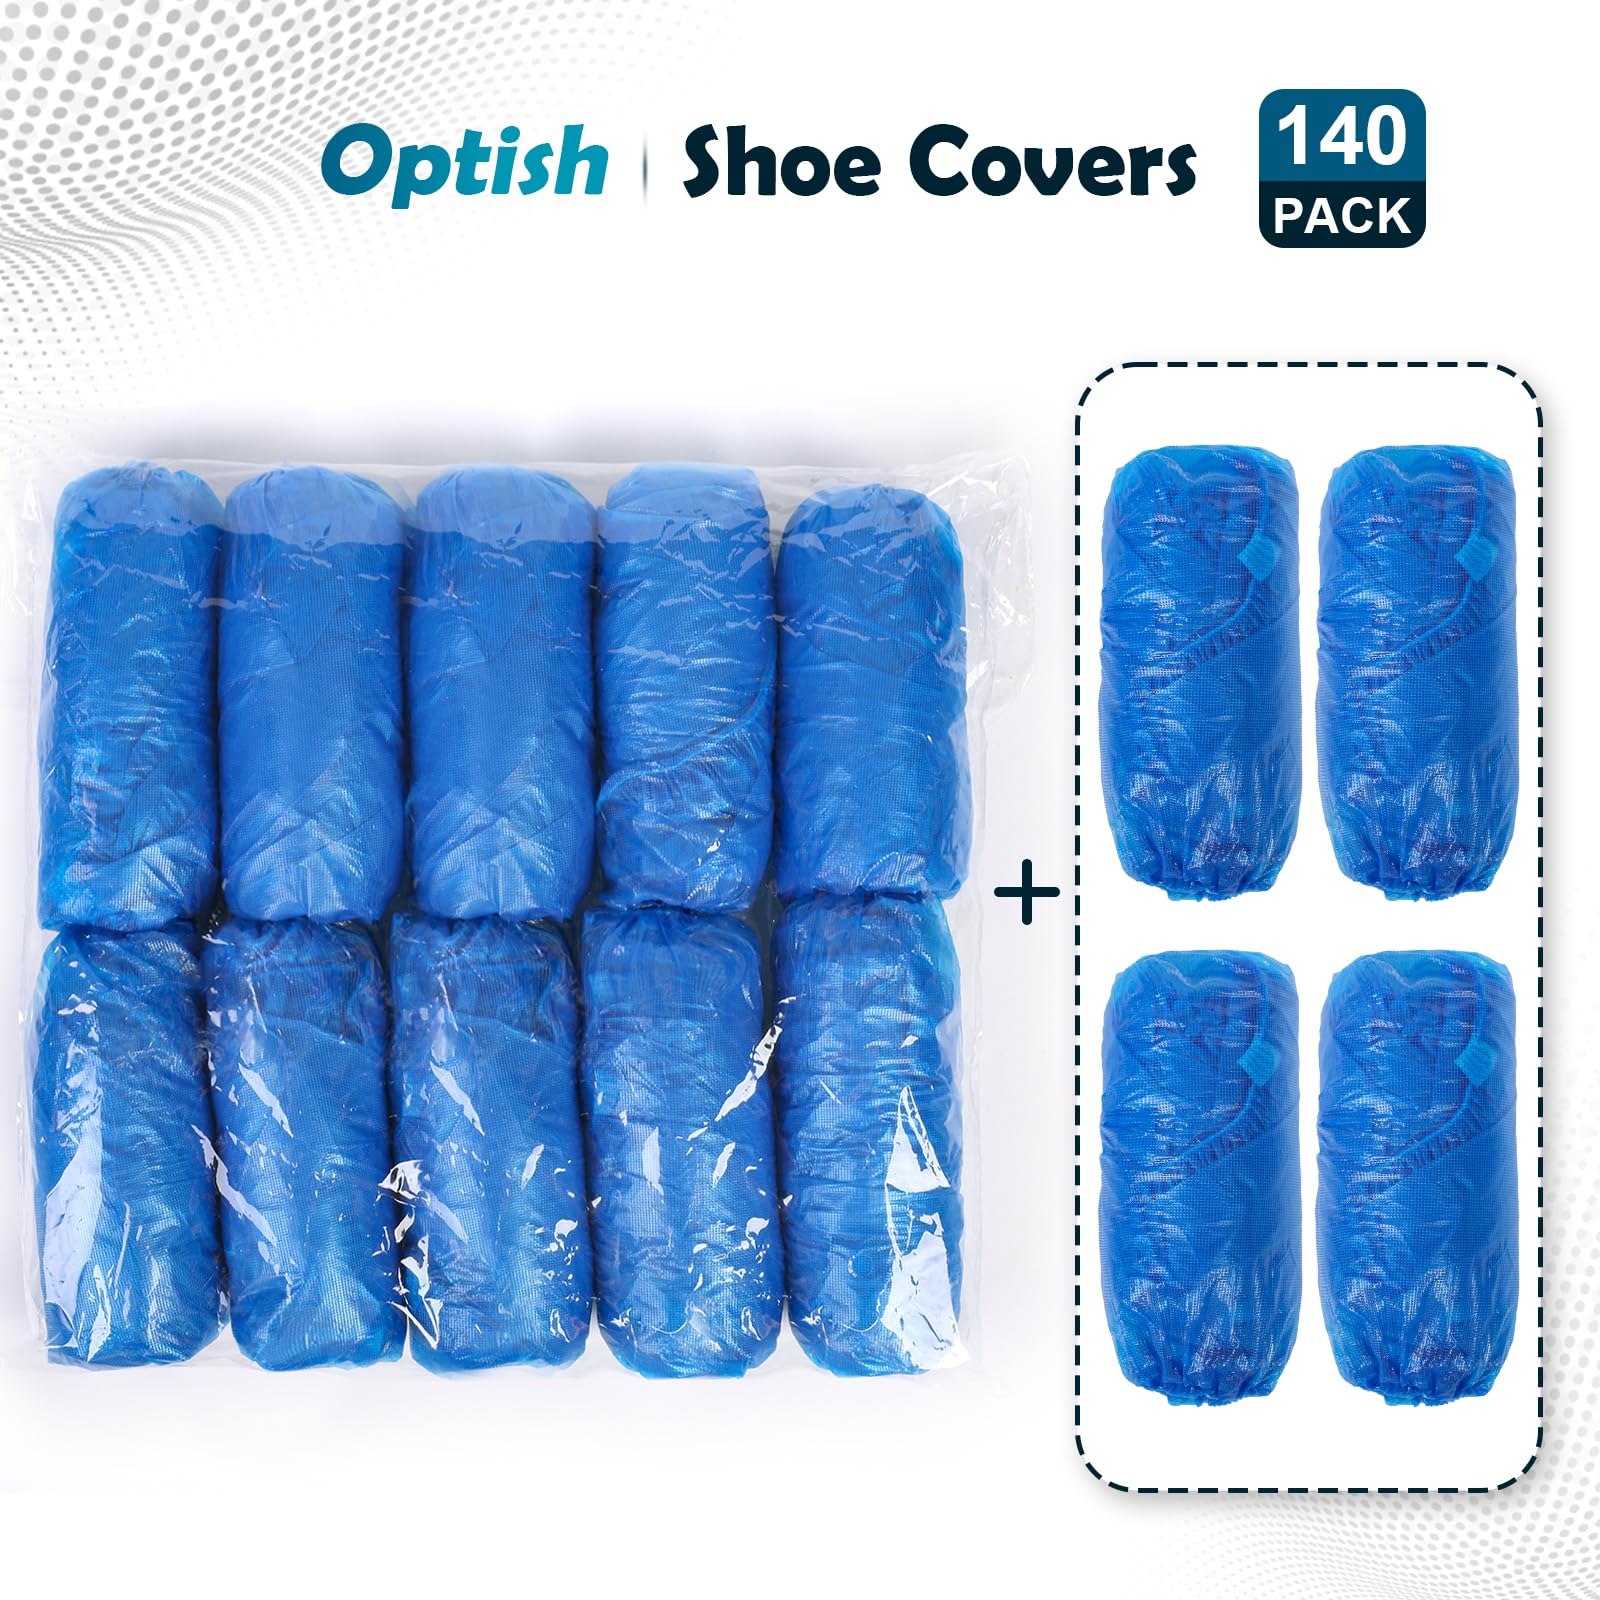 Optish 140 Pack 70 Pairs Shoe Covers Disposable Non Slip, Shoe Booties Covers Dust proof for Indoors Protect Your Shoes, Floor, Carpet